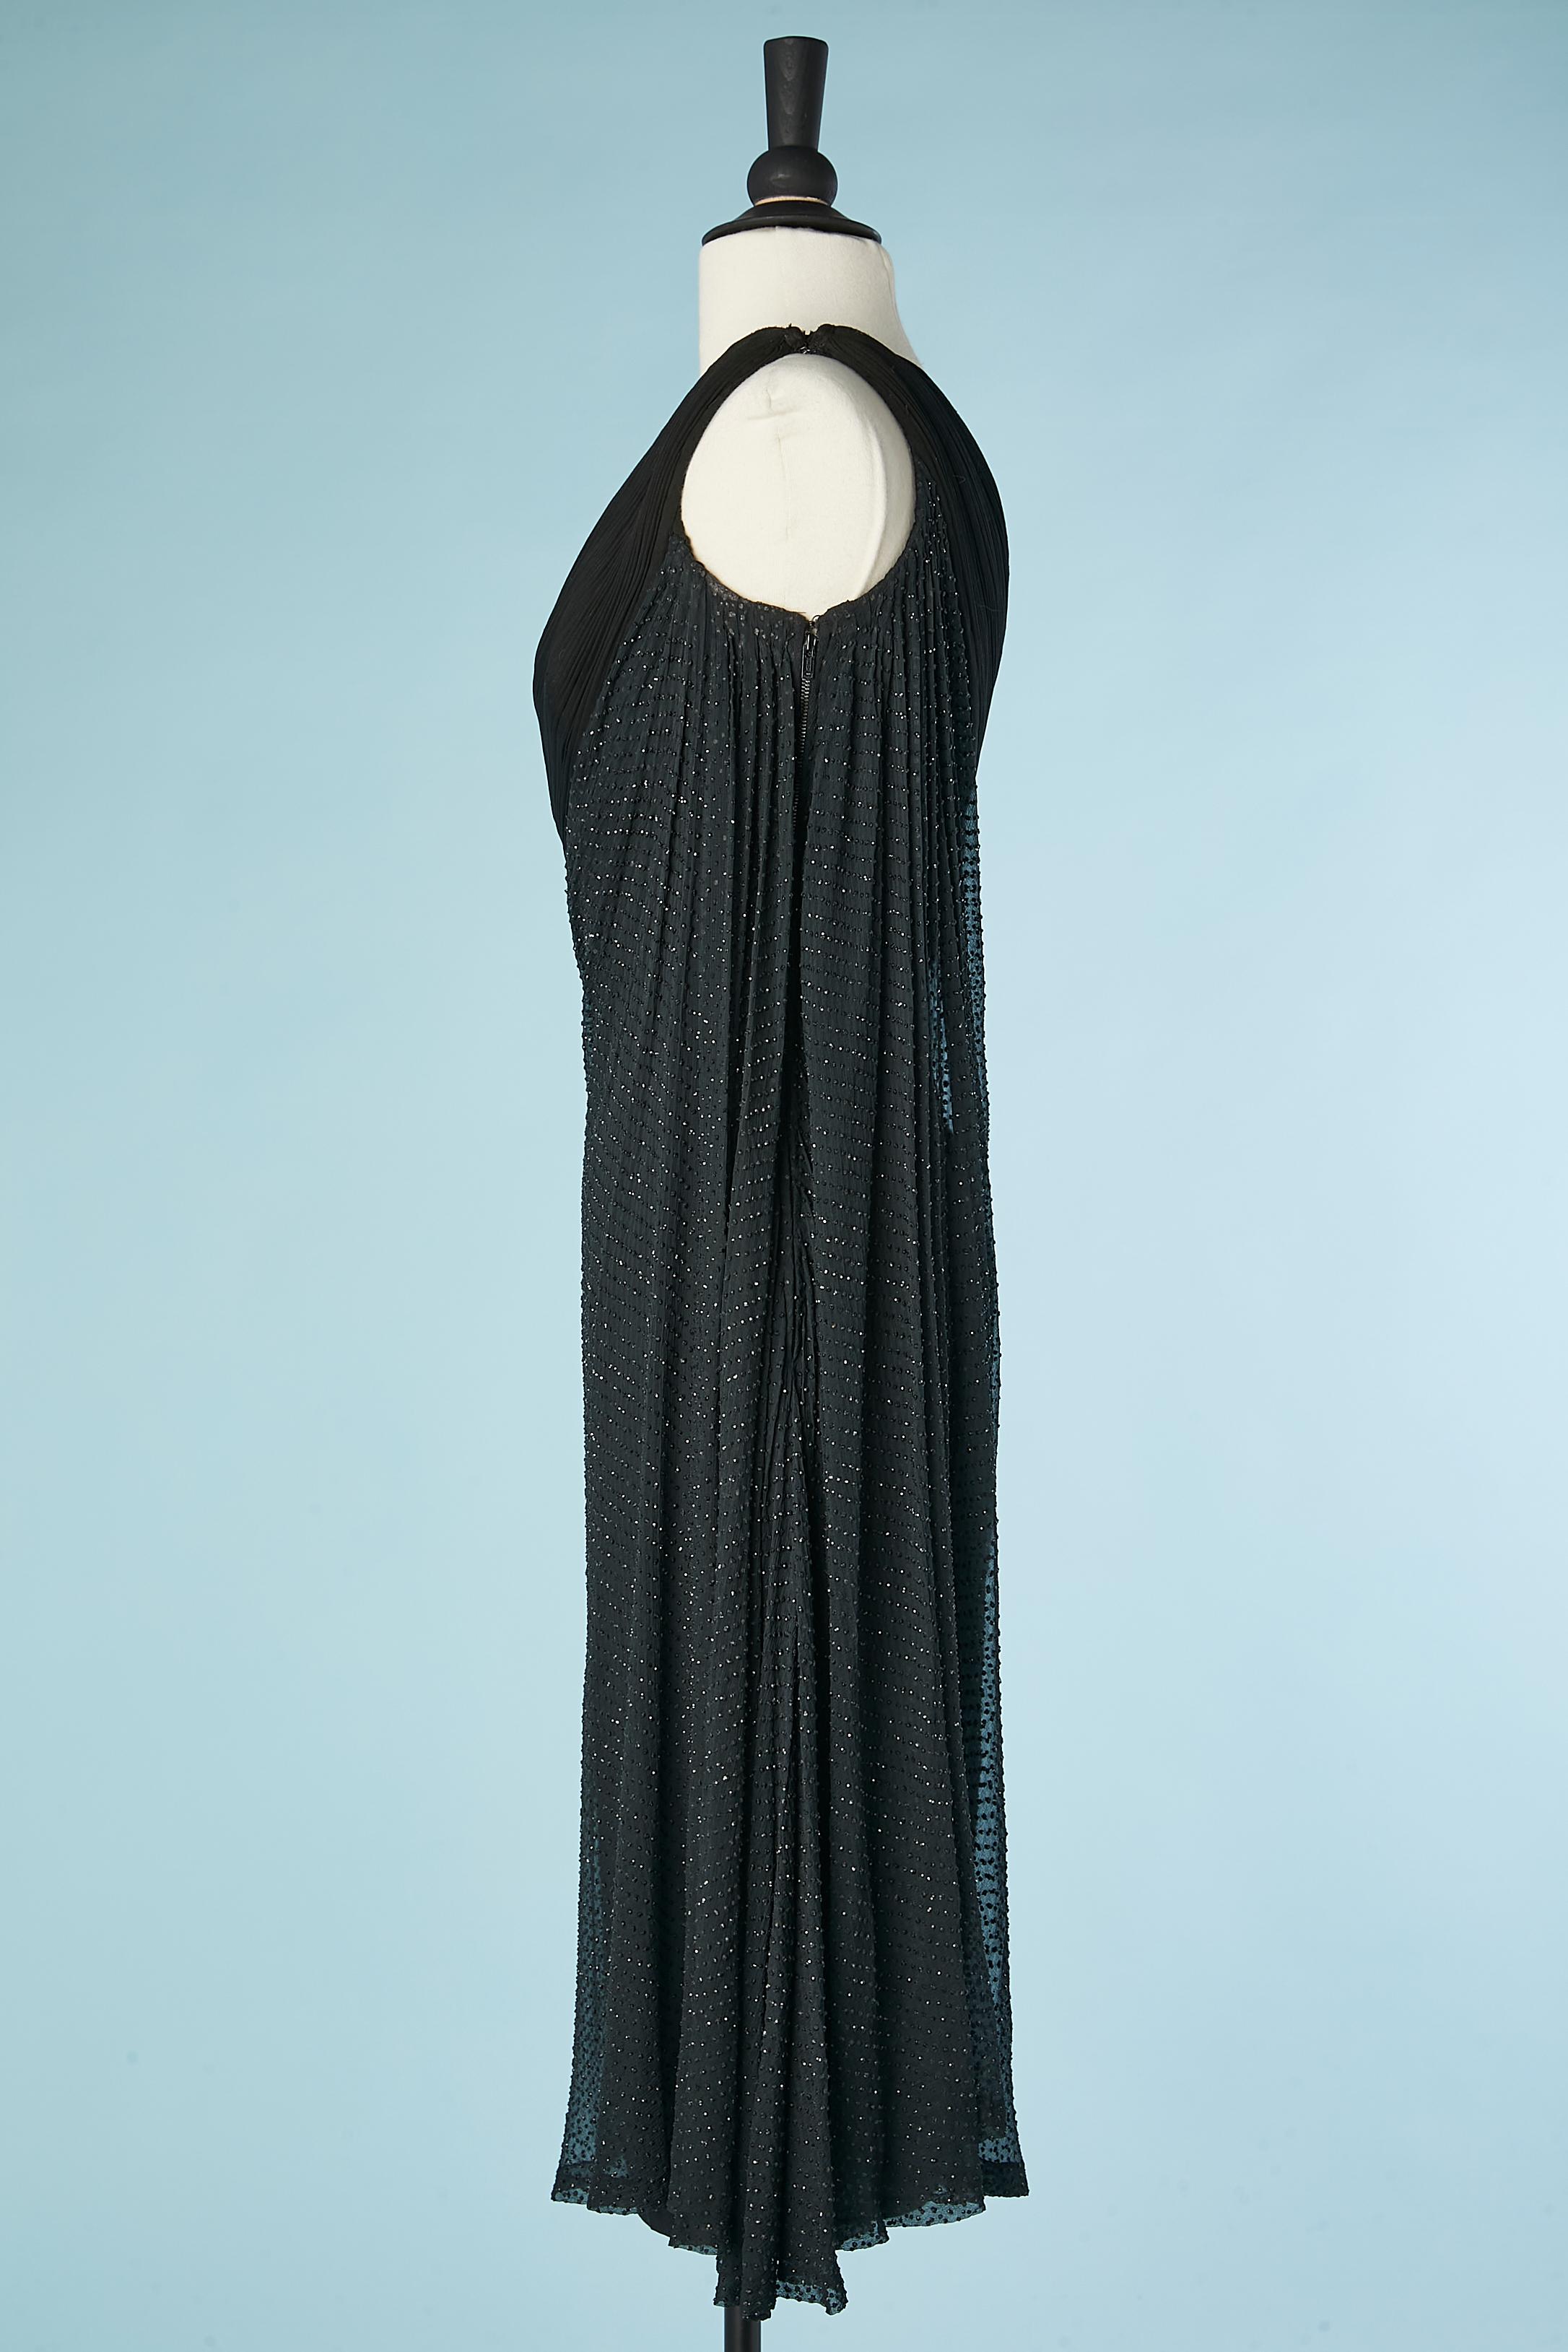 Black asymmetrical cocktail dress pleated and draped Grès 1962 For Sale 2